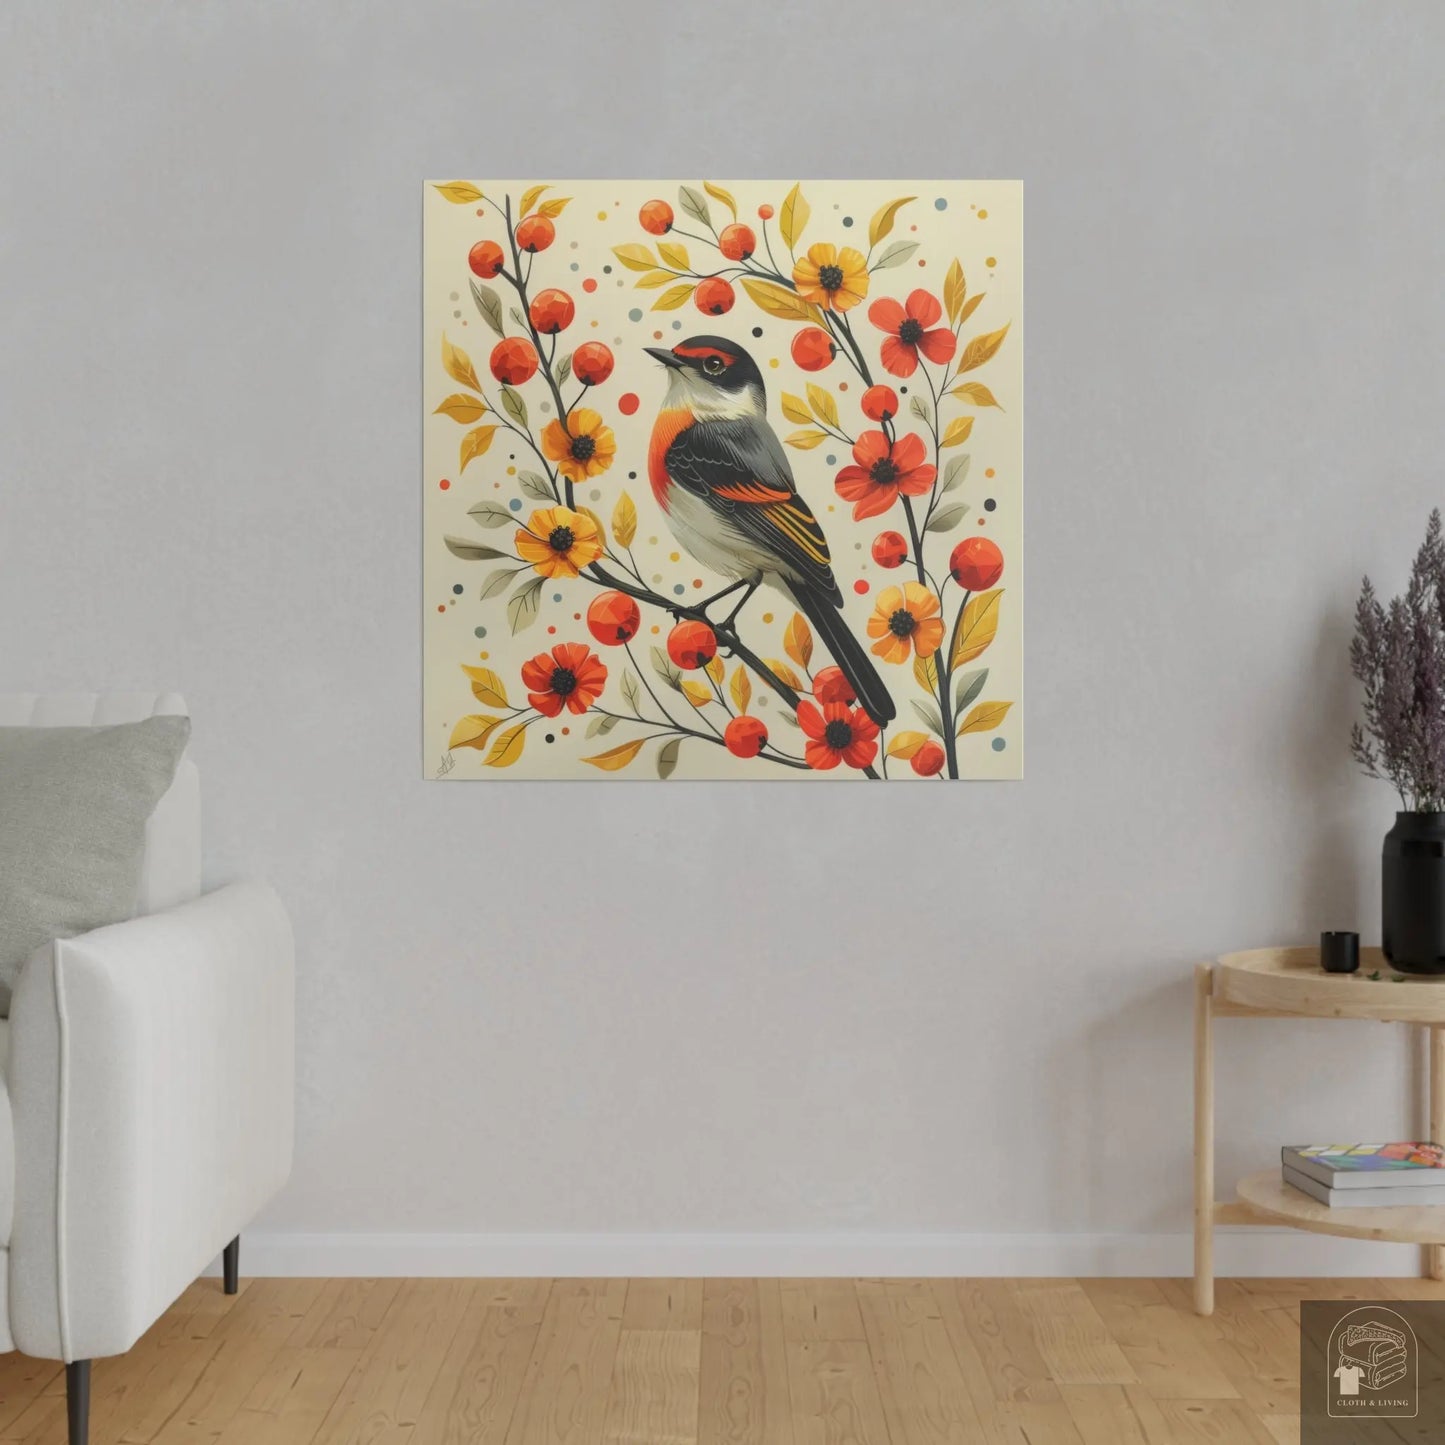 Harmony in Autumn - Bird & Floral Canvas Art (Available in 3 sizes) -   Cloth & Living